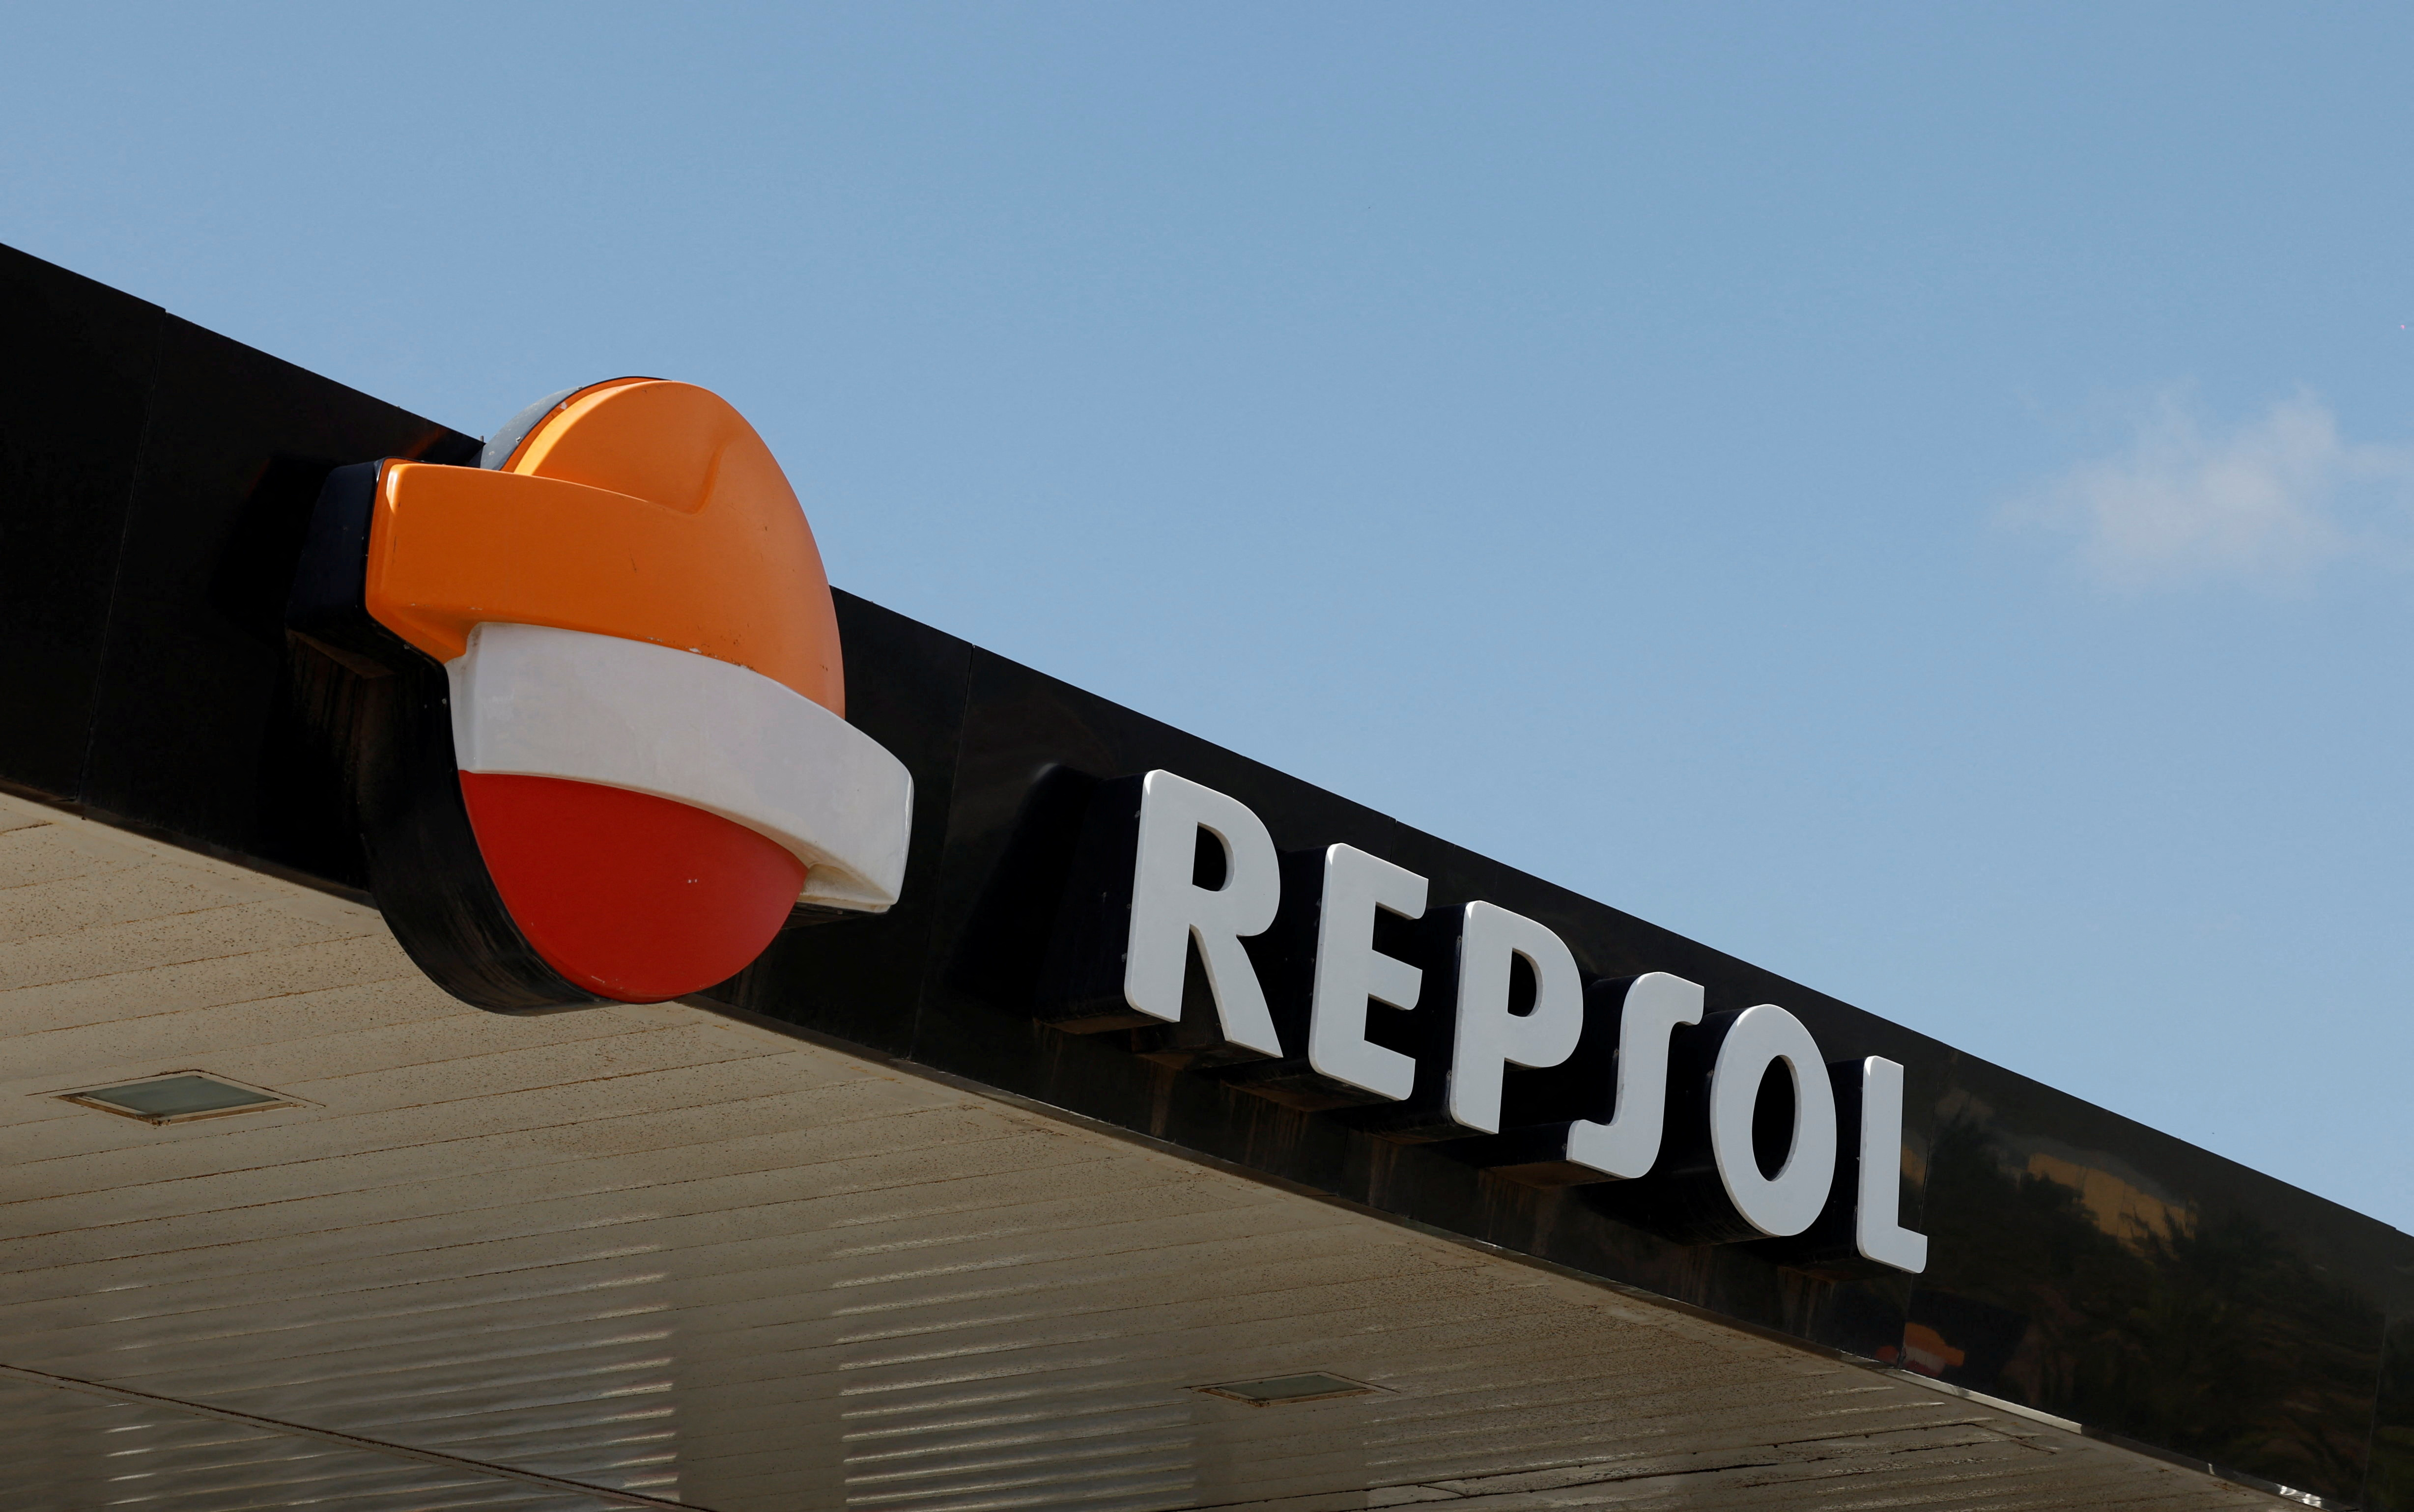 The logo of Spanish energy group Repsol is seen at a gas station in Arinaga